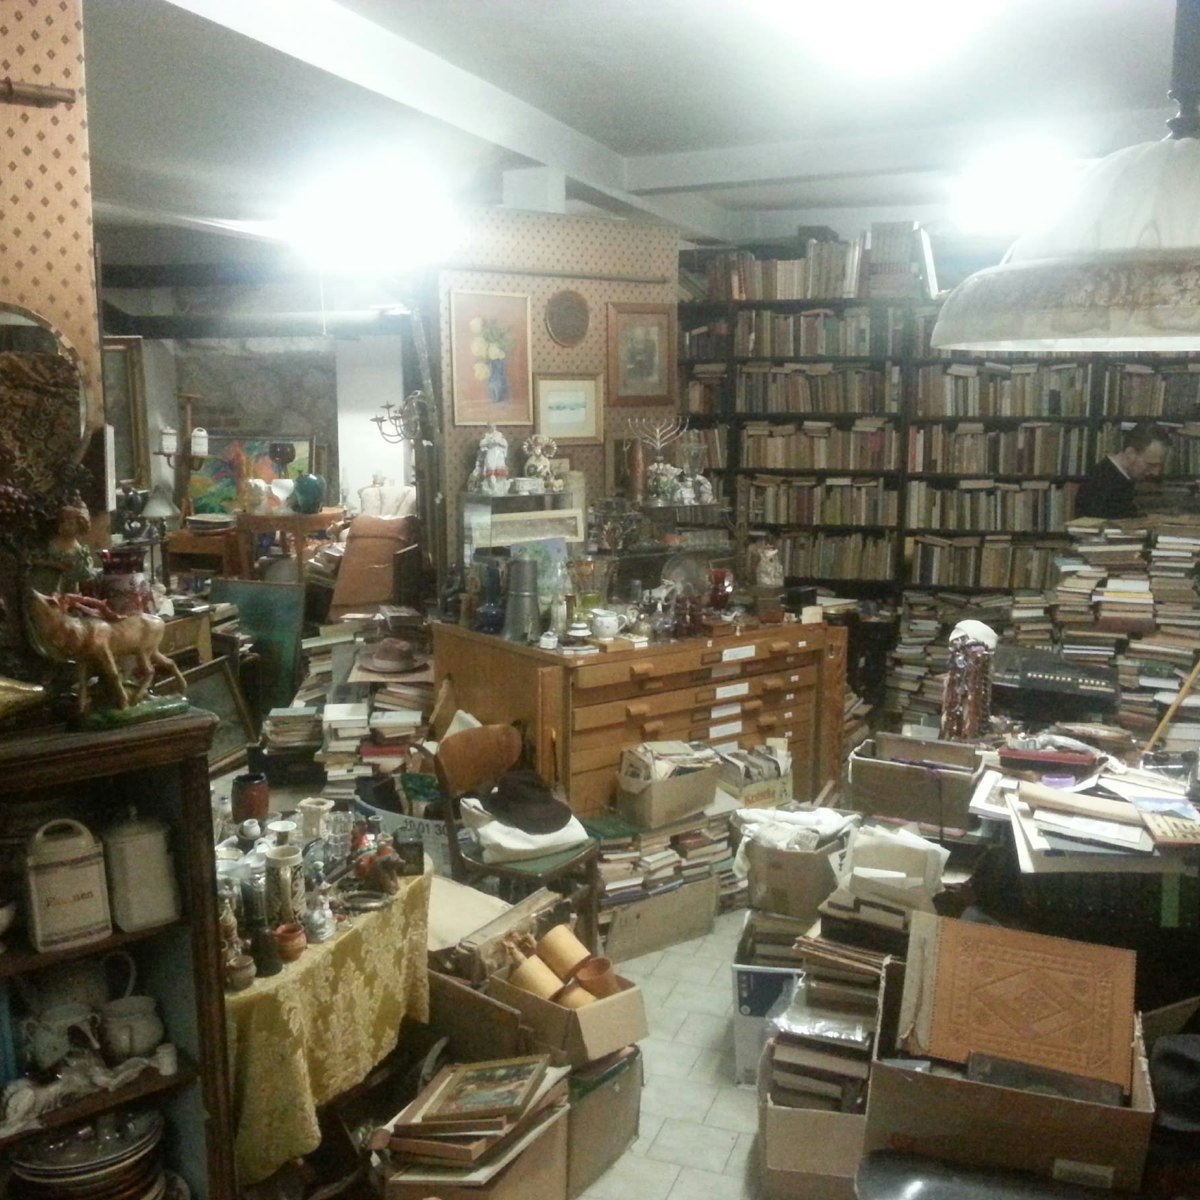 You could easily spend half an hour sifting through the endless stacks of old treasures at Antykwariat na Kazimierzu